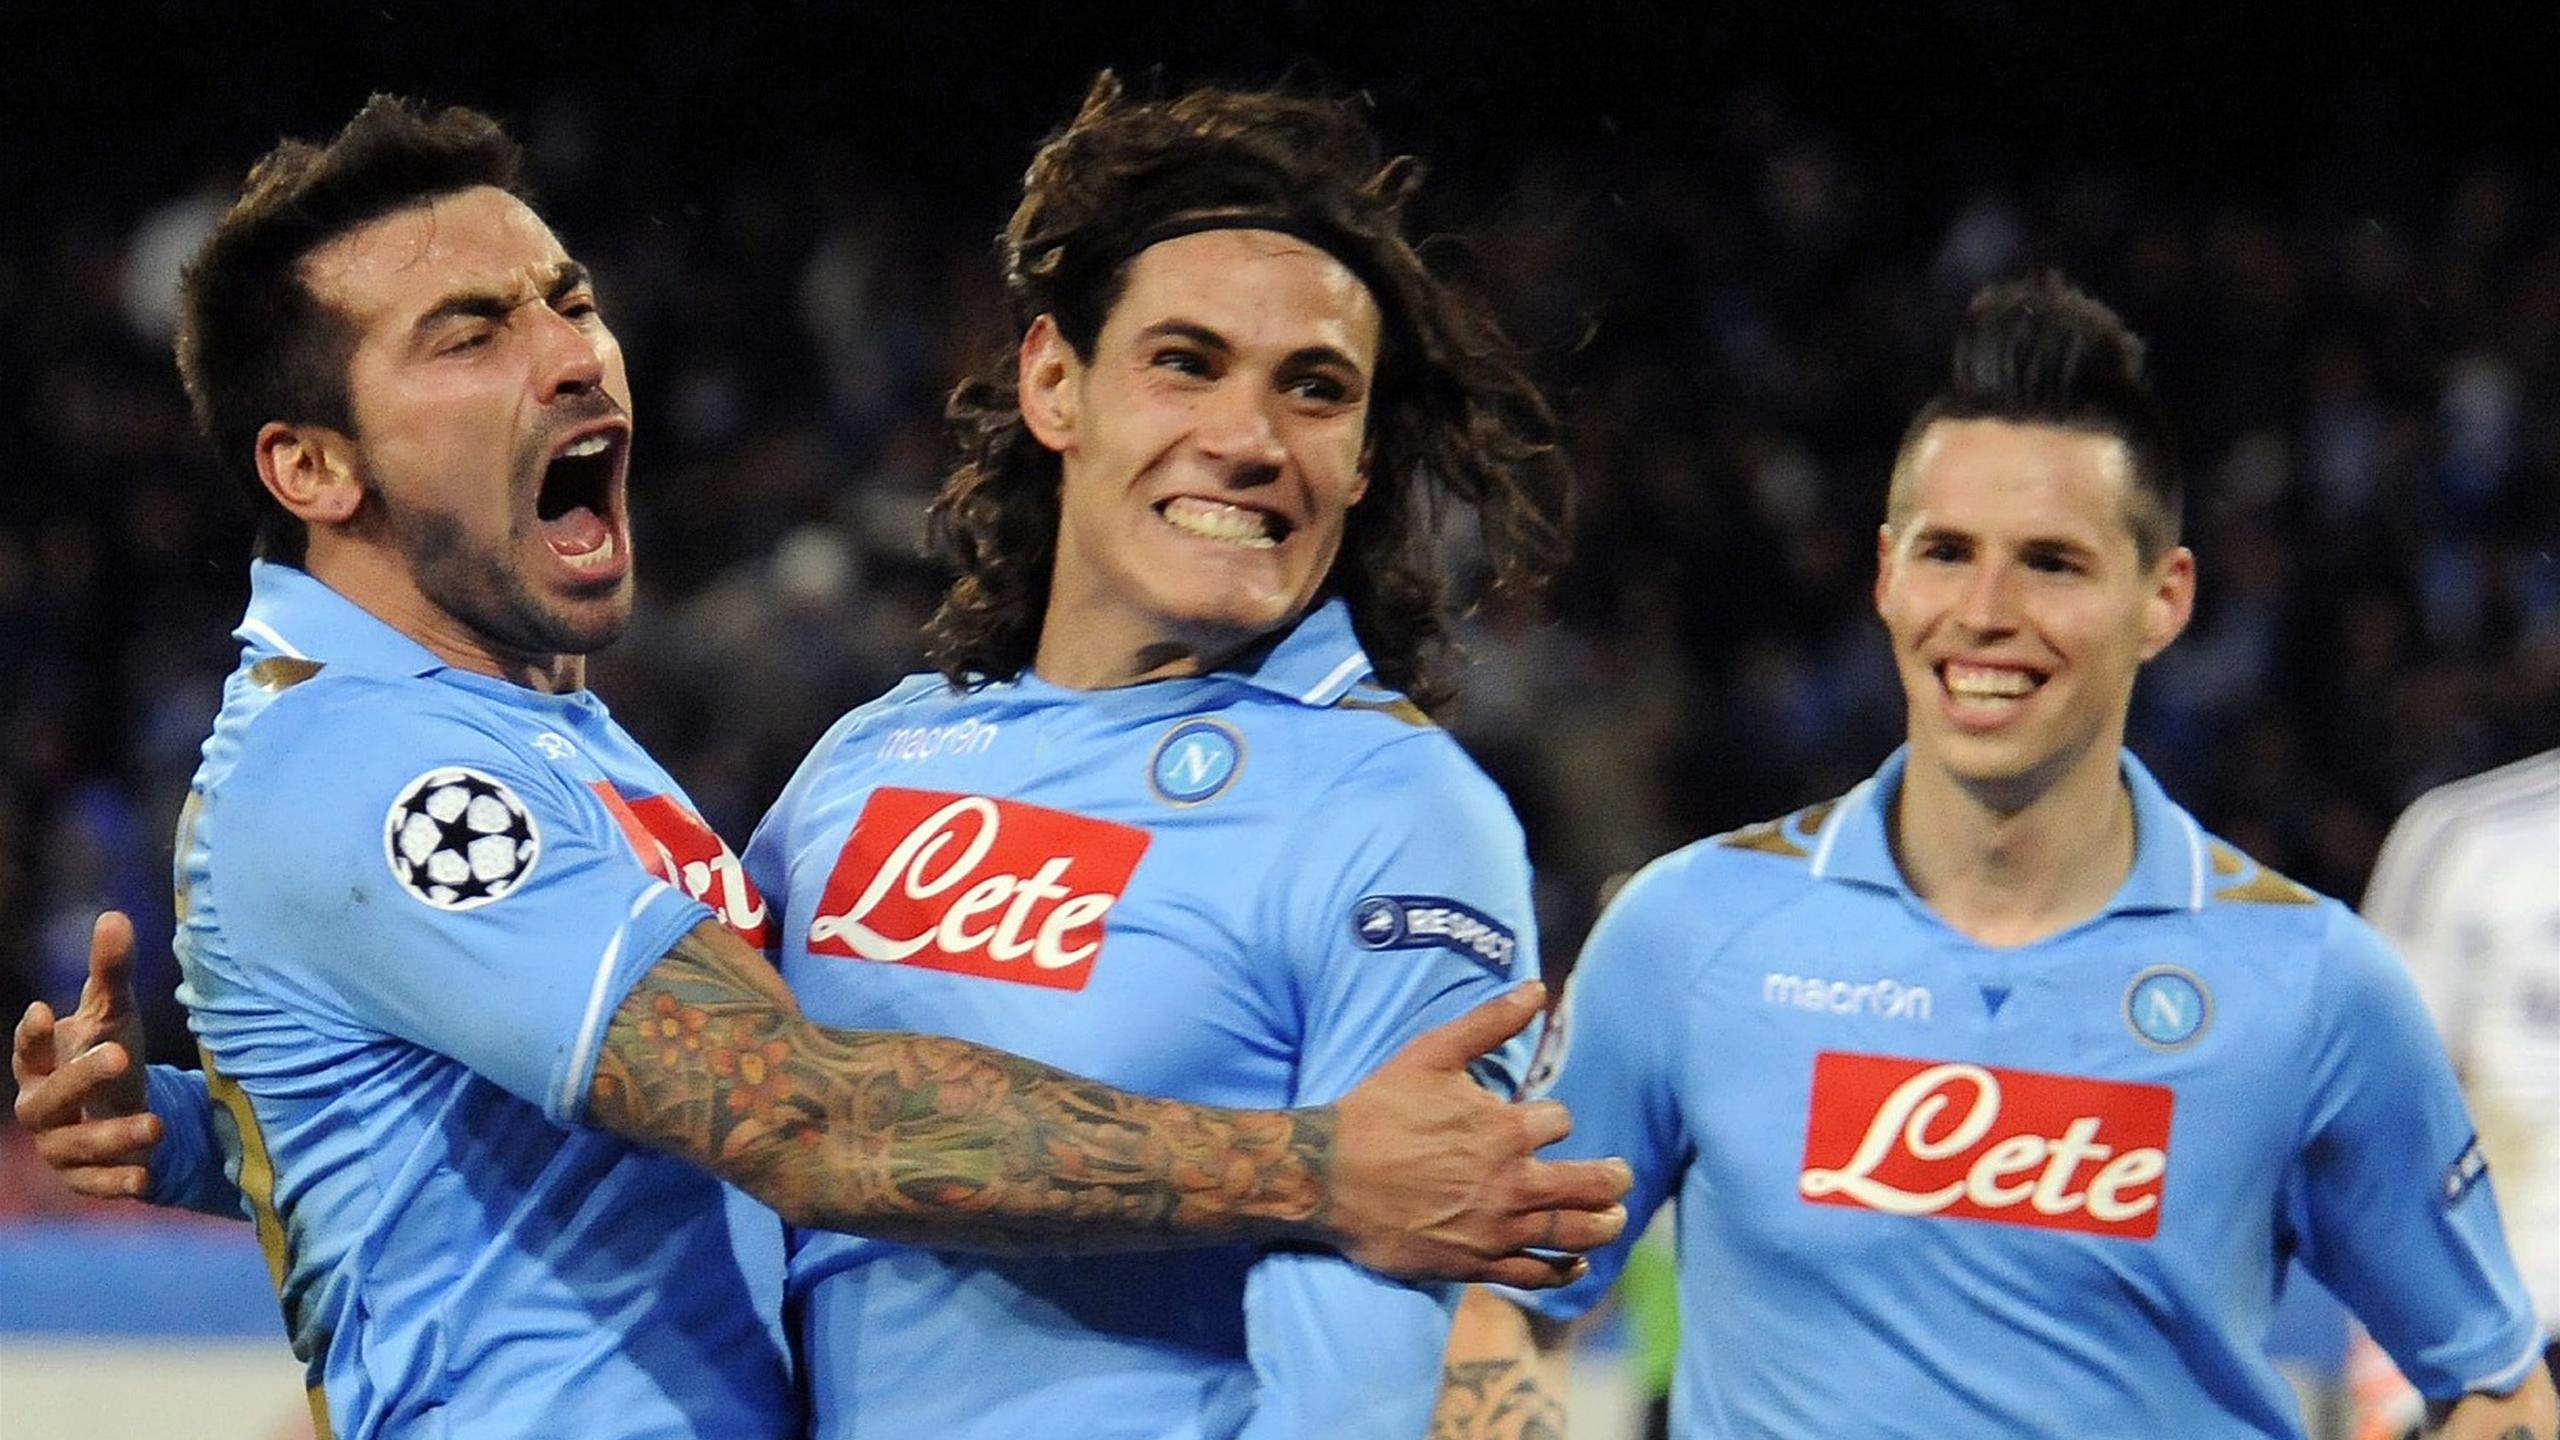 The game between Napoli and Lazio from April 3, 2011, is one of those matches that would make even an occasional viewer fall in love with Serie A